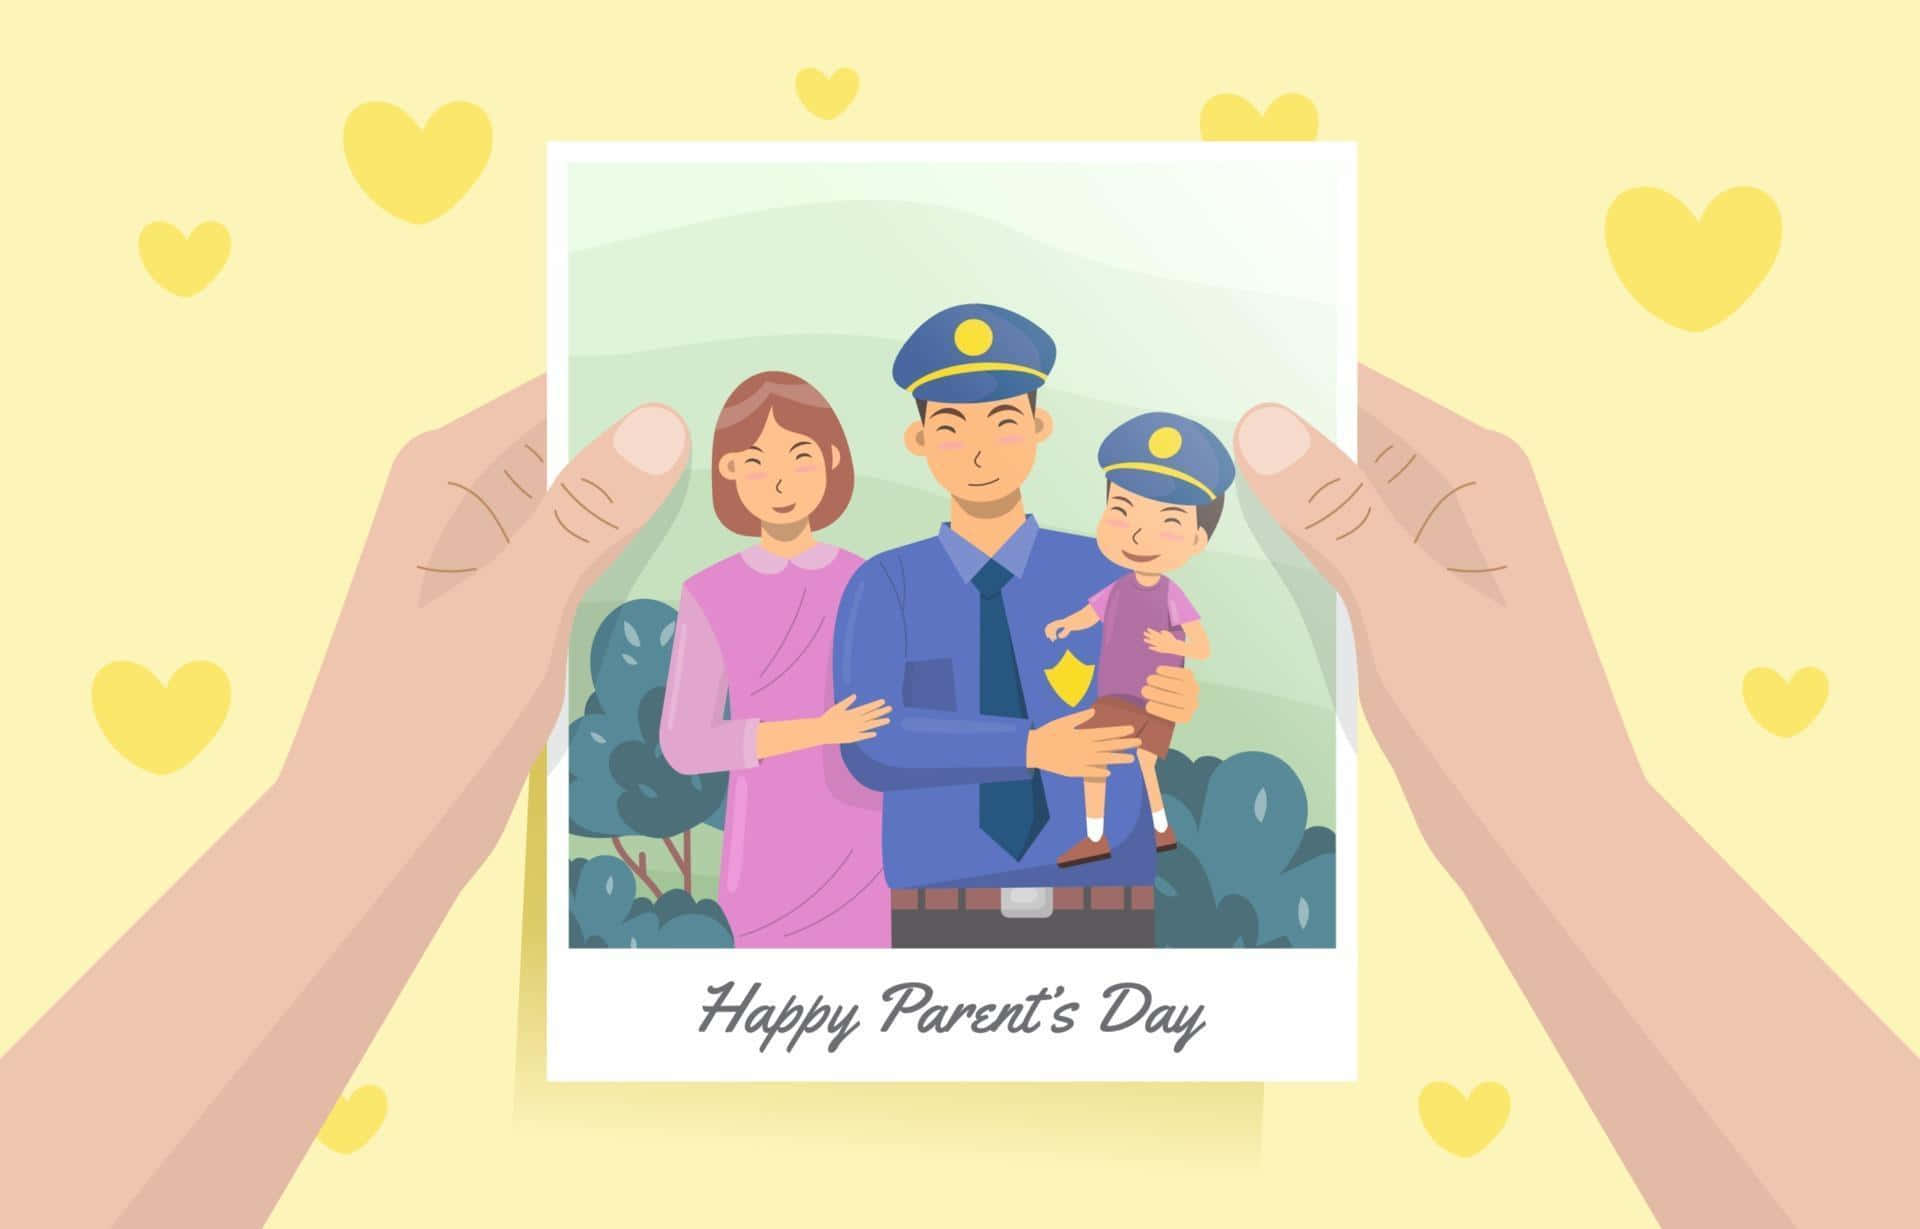 Celebrating Love And Care: Happy Parents' Day Wallpaper